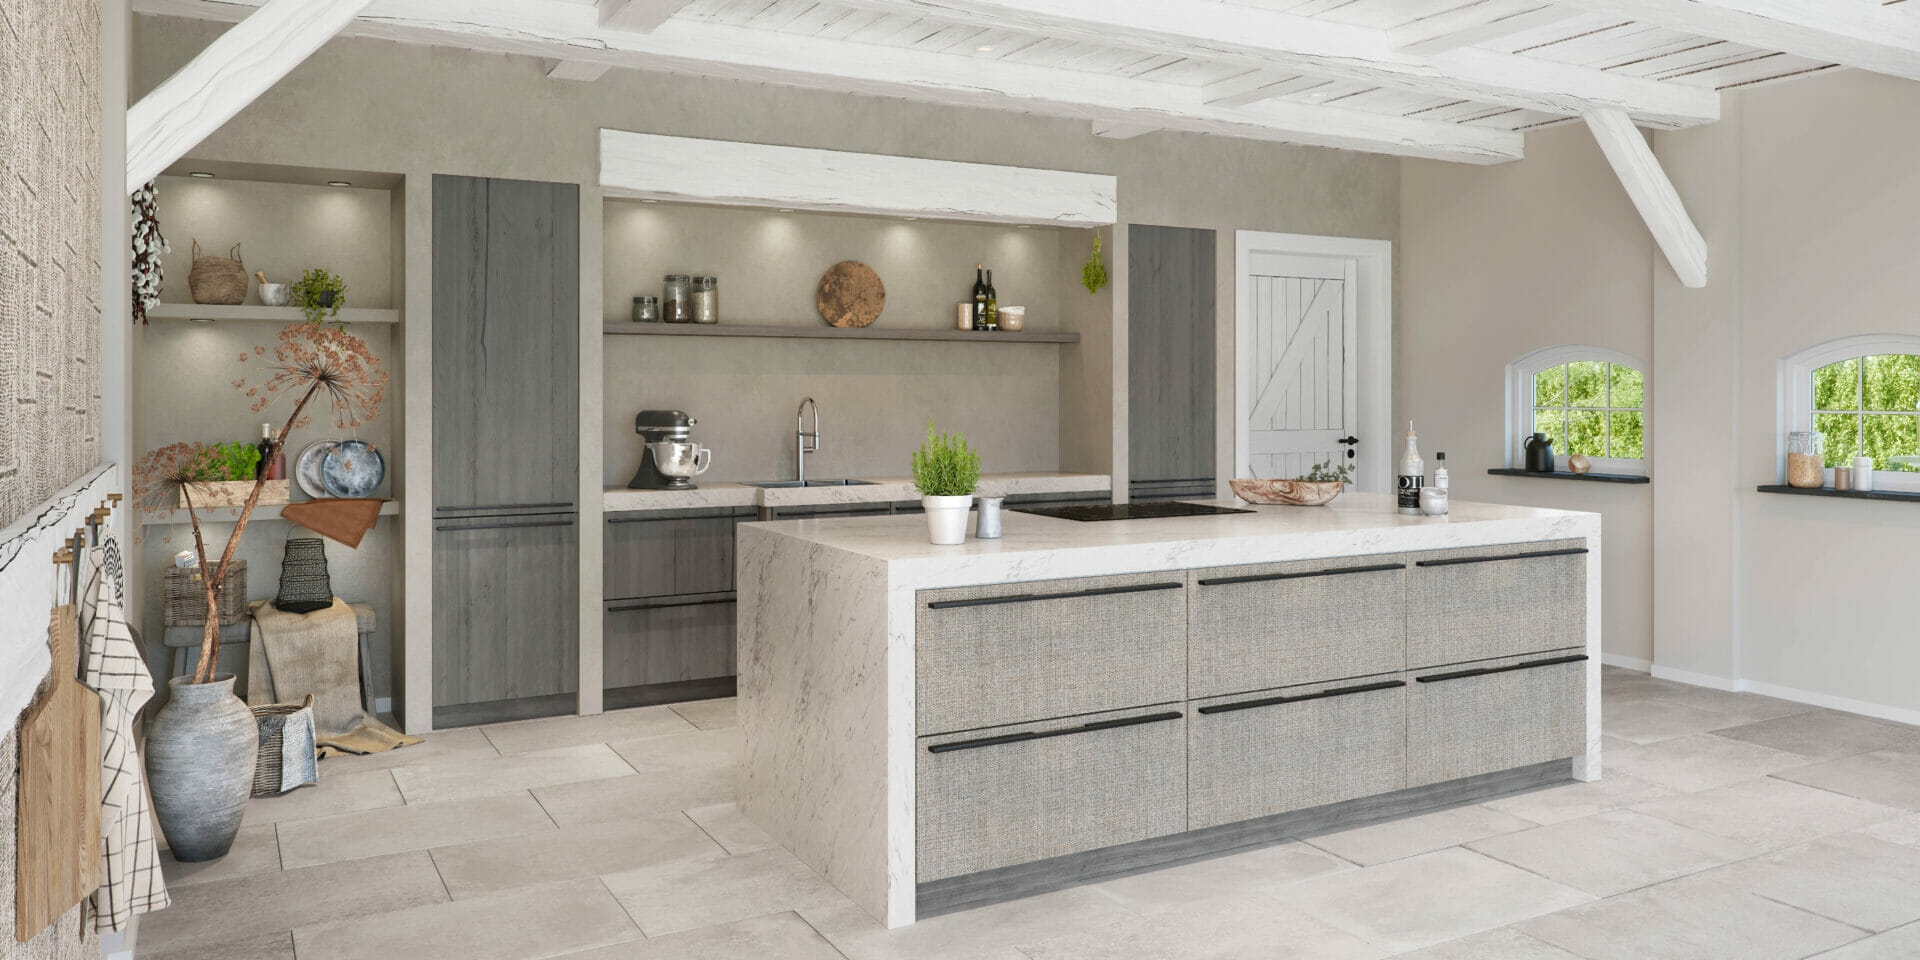 Keller launches Cottage Life kitchen for a natural aesthetic 